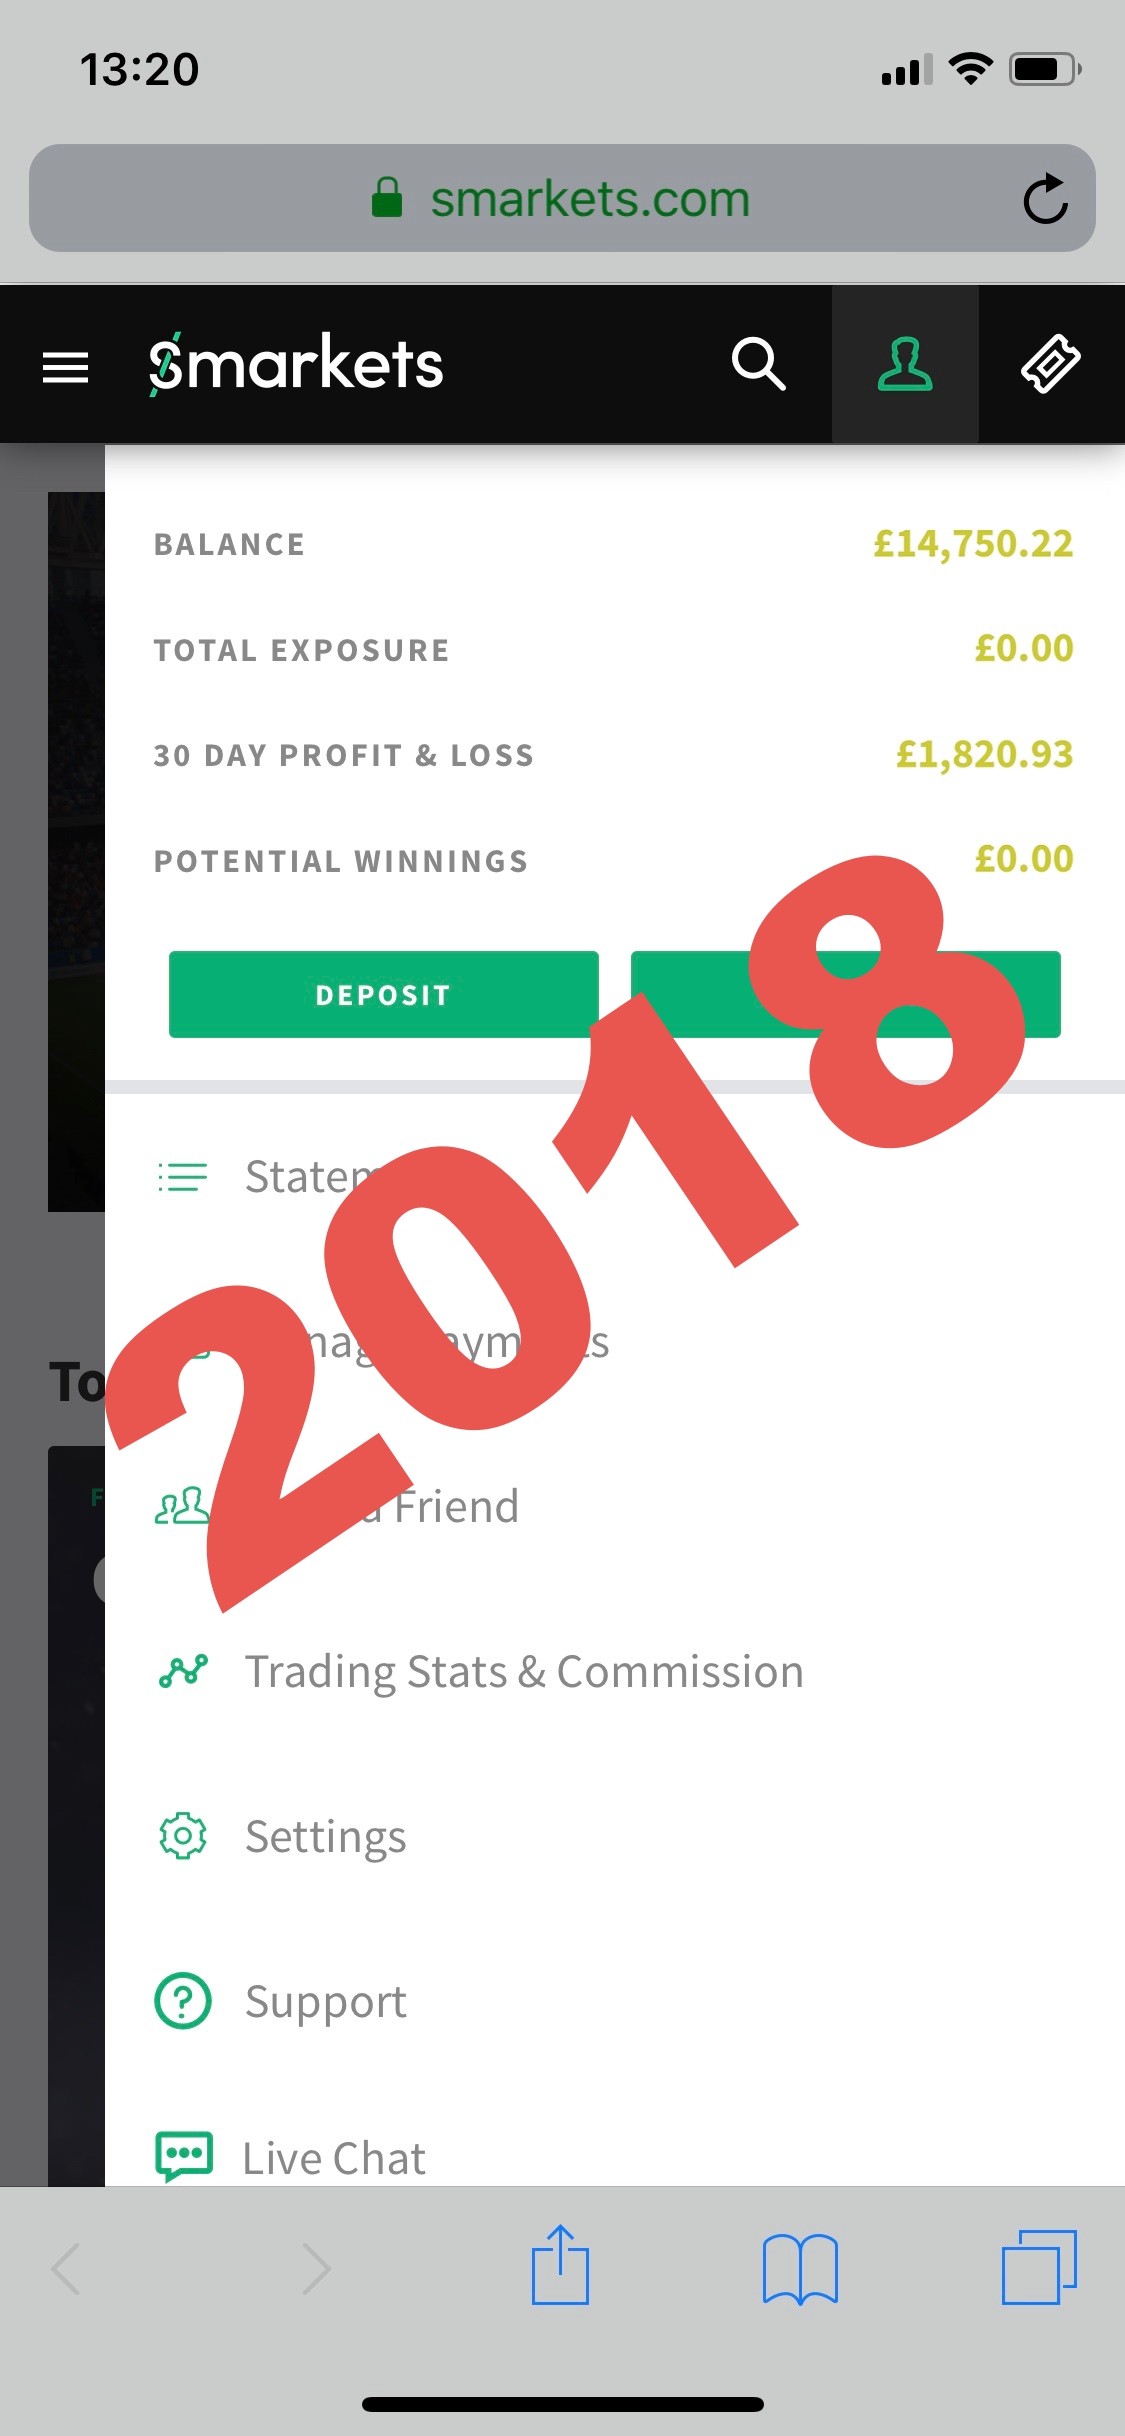 Screenshot of Smarkets balance using the horse lay betting system in 2018